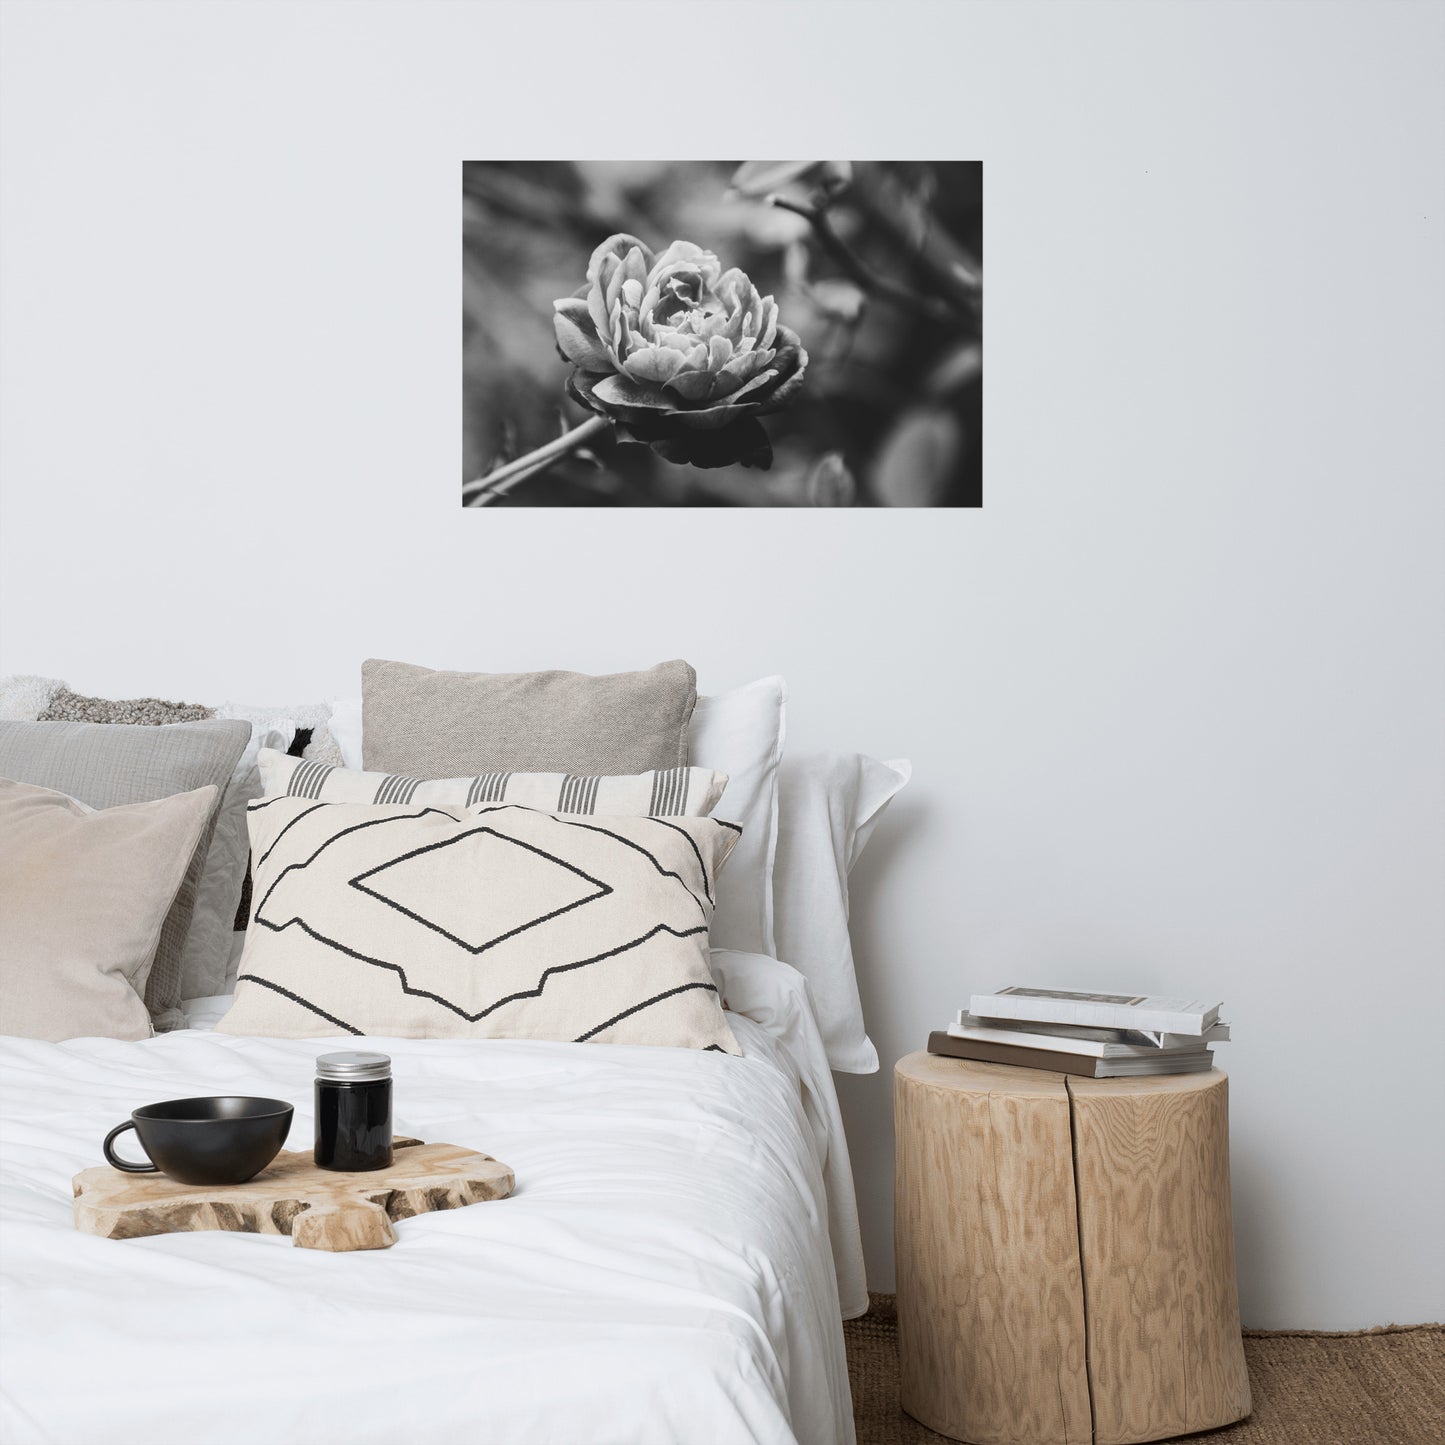 Perfect Petals Black and White Floral Nature Photo Loose Unframed Wall Art Prints